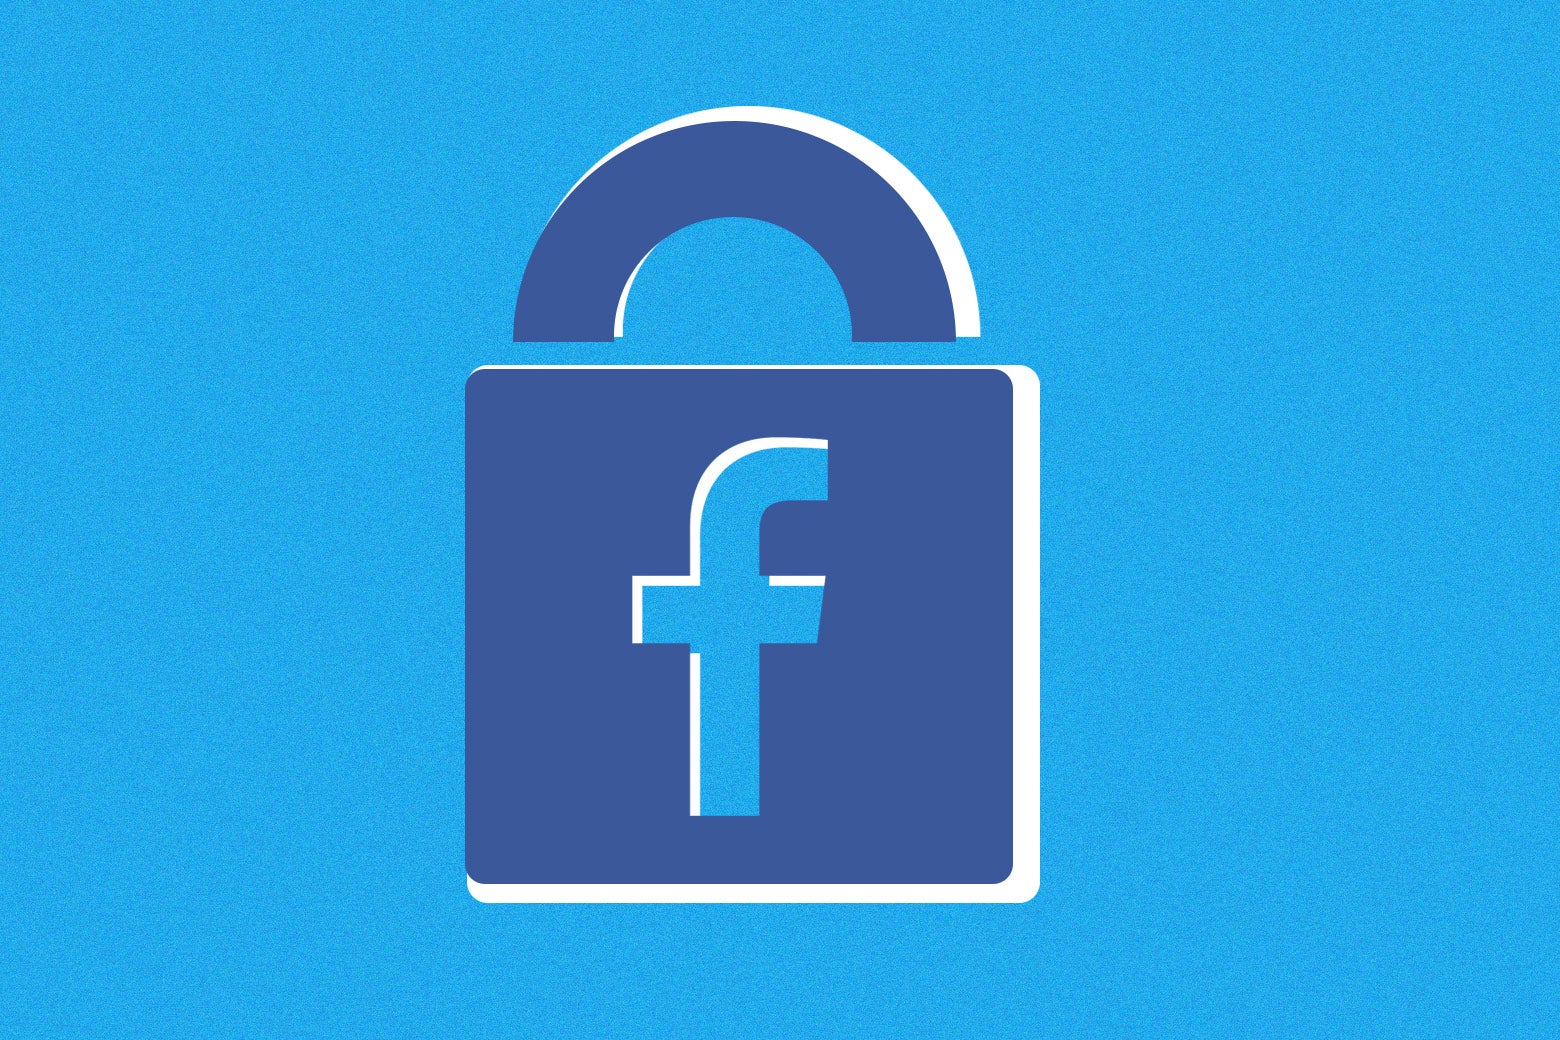 A Facebook logo incorporated into a lock